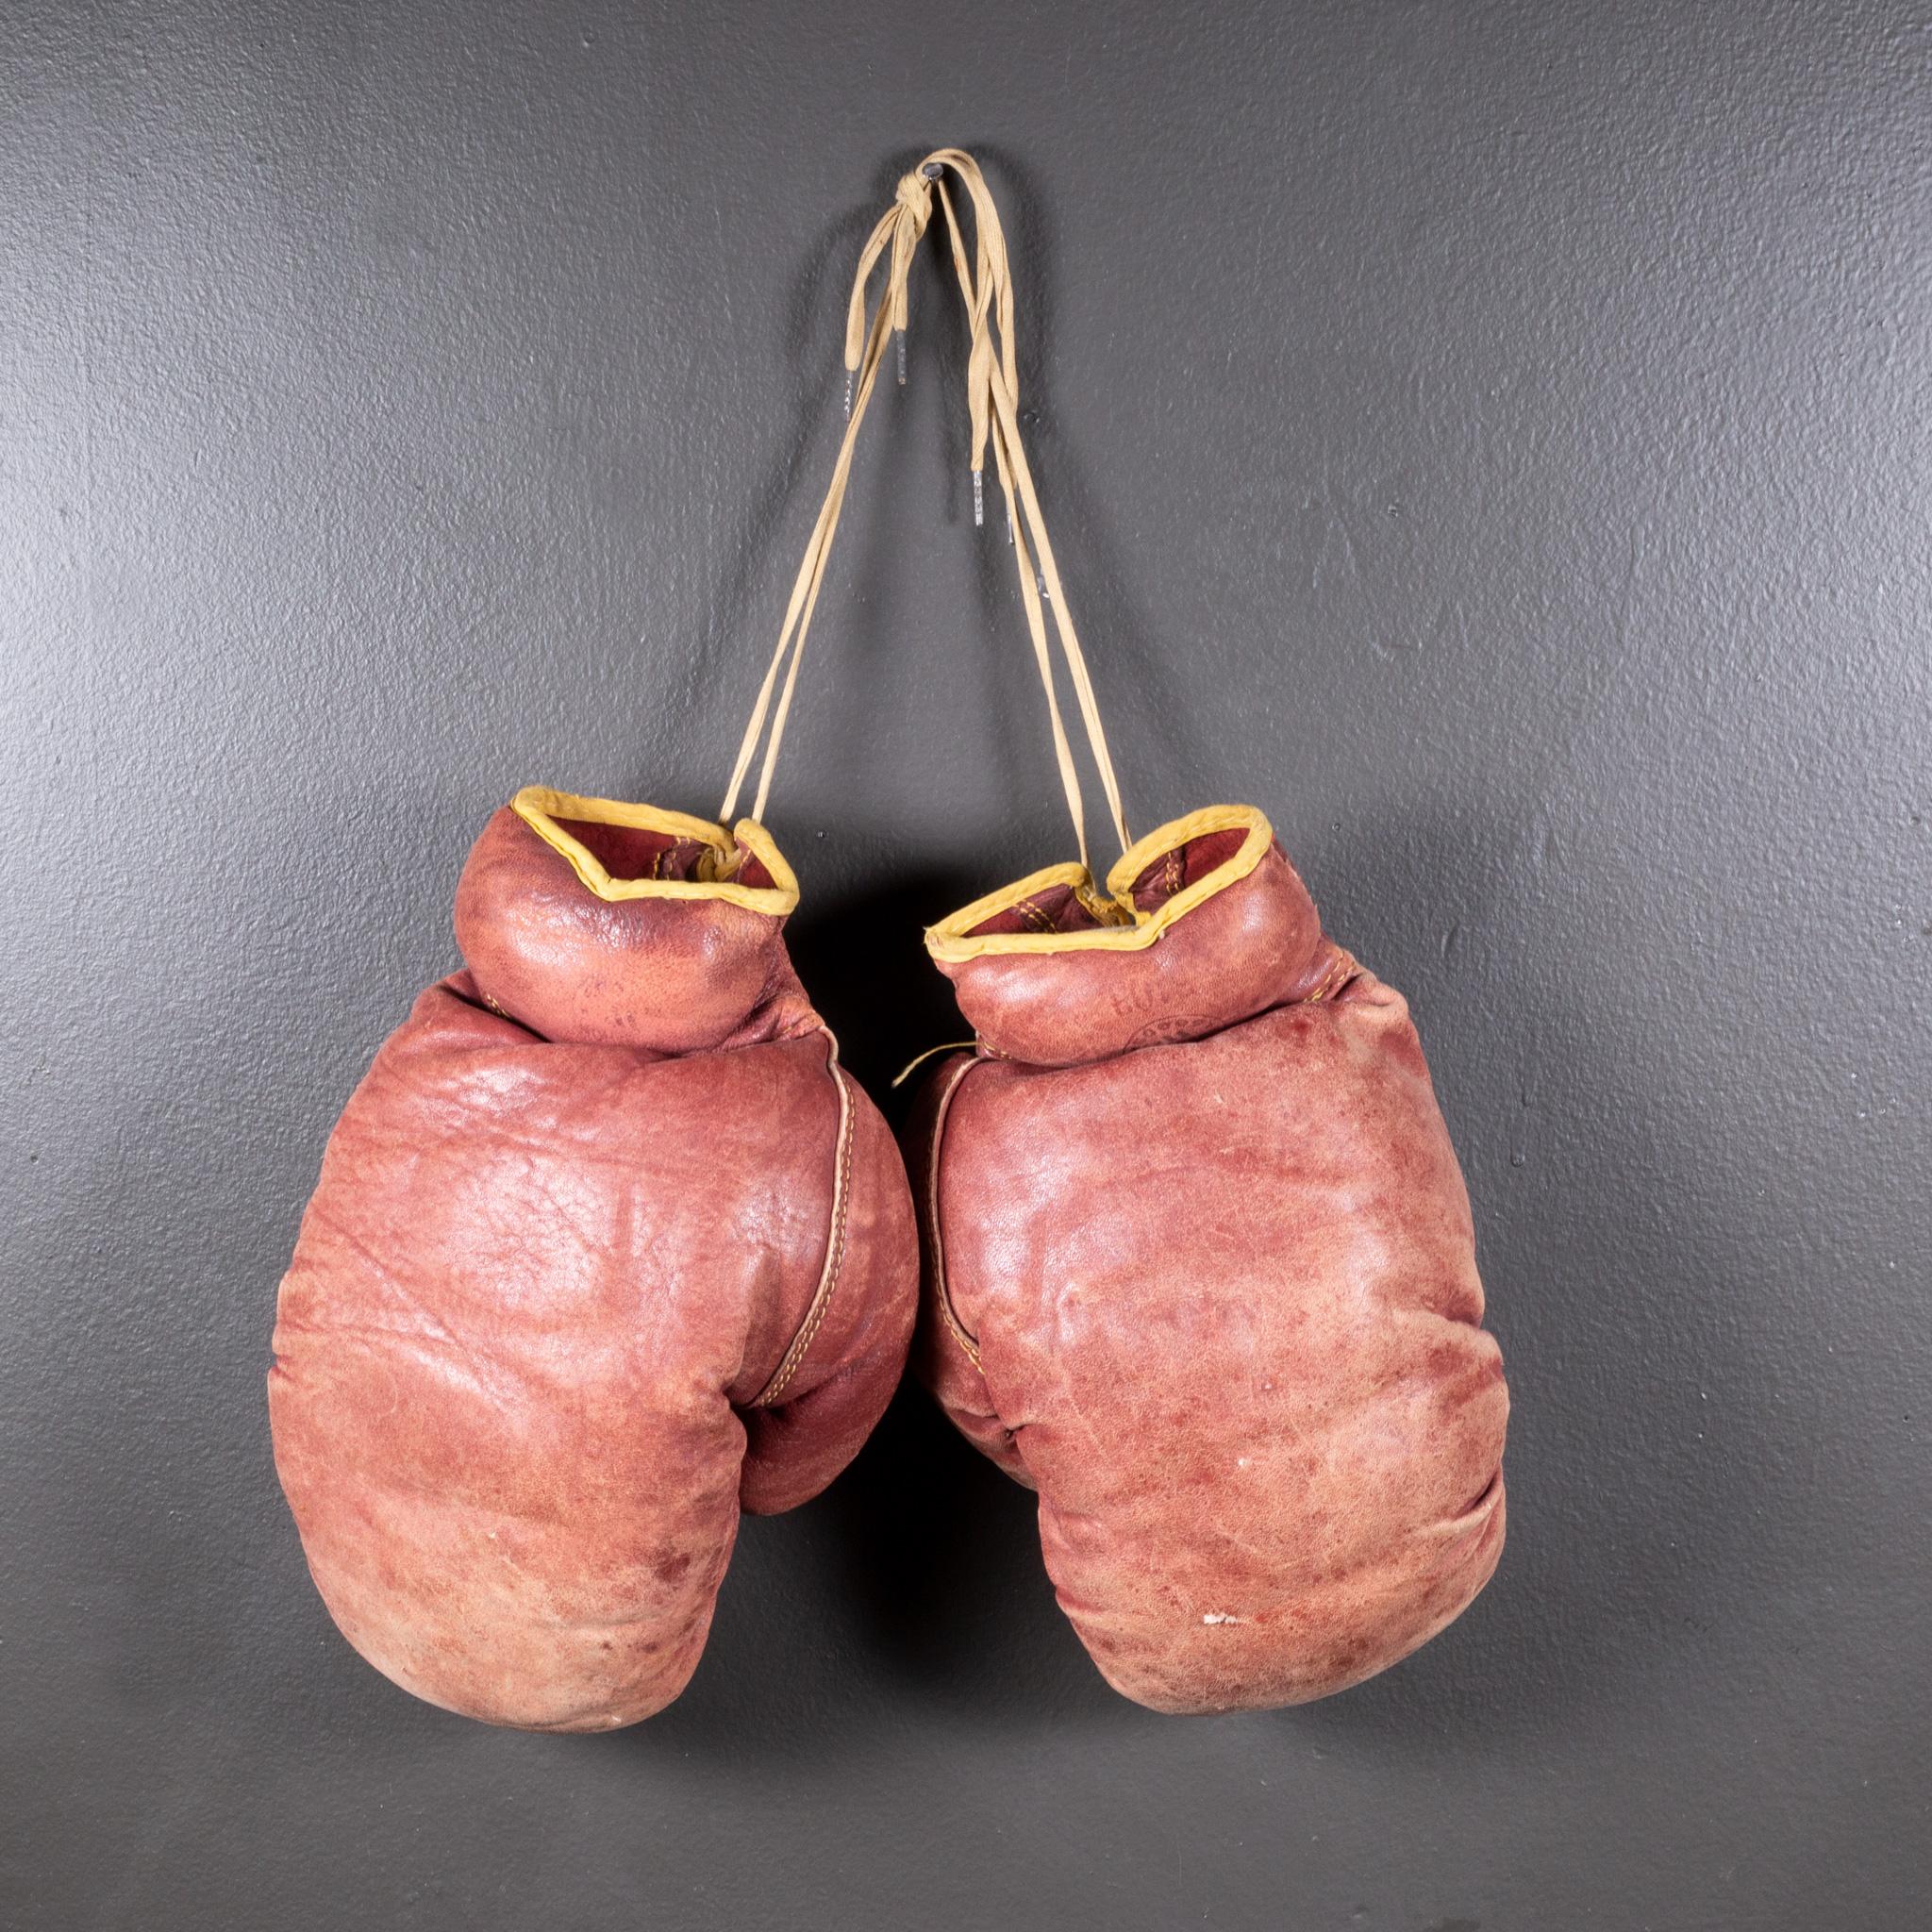 ABOUT

A pair of authentic vintage boxing gloves with reddish, brown leather. Each glove has gold leather piping. The leather is very soft and is good condition. Stamped 